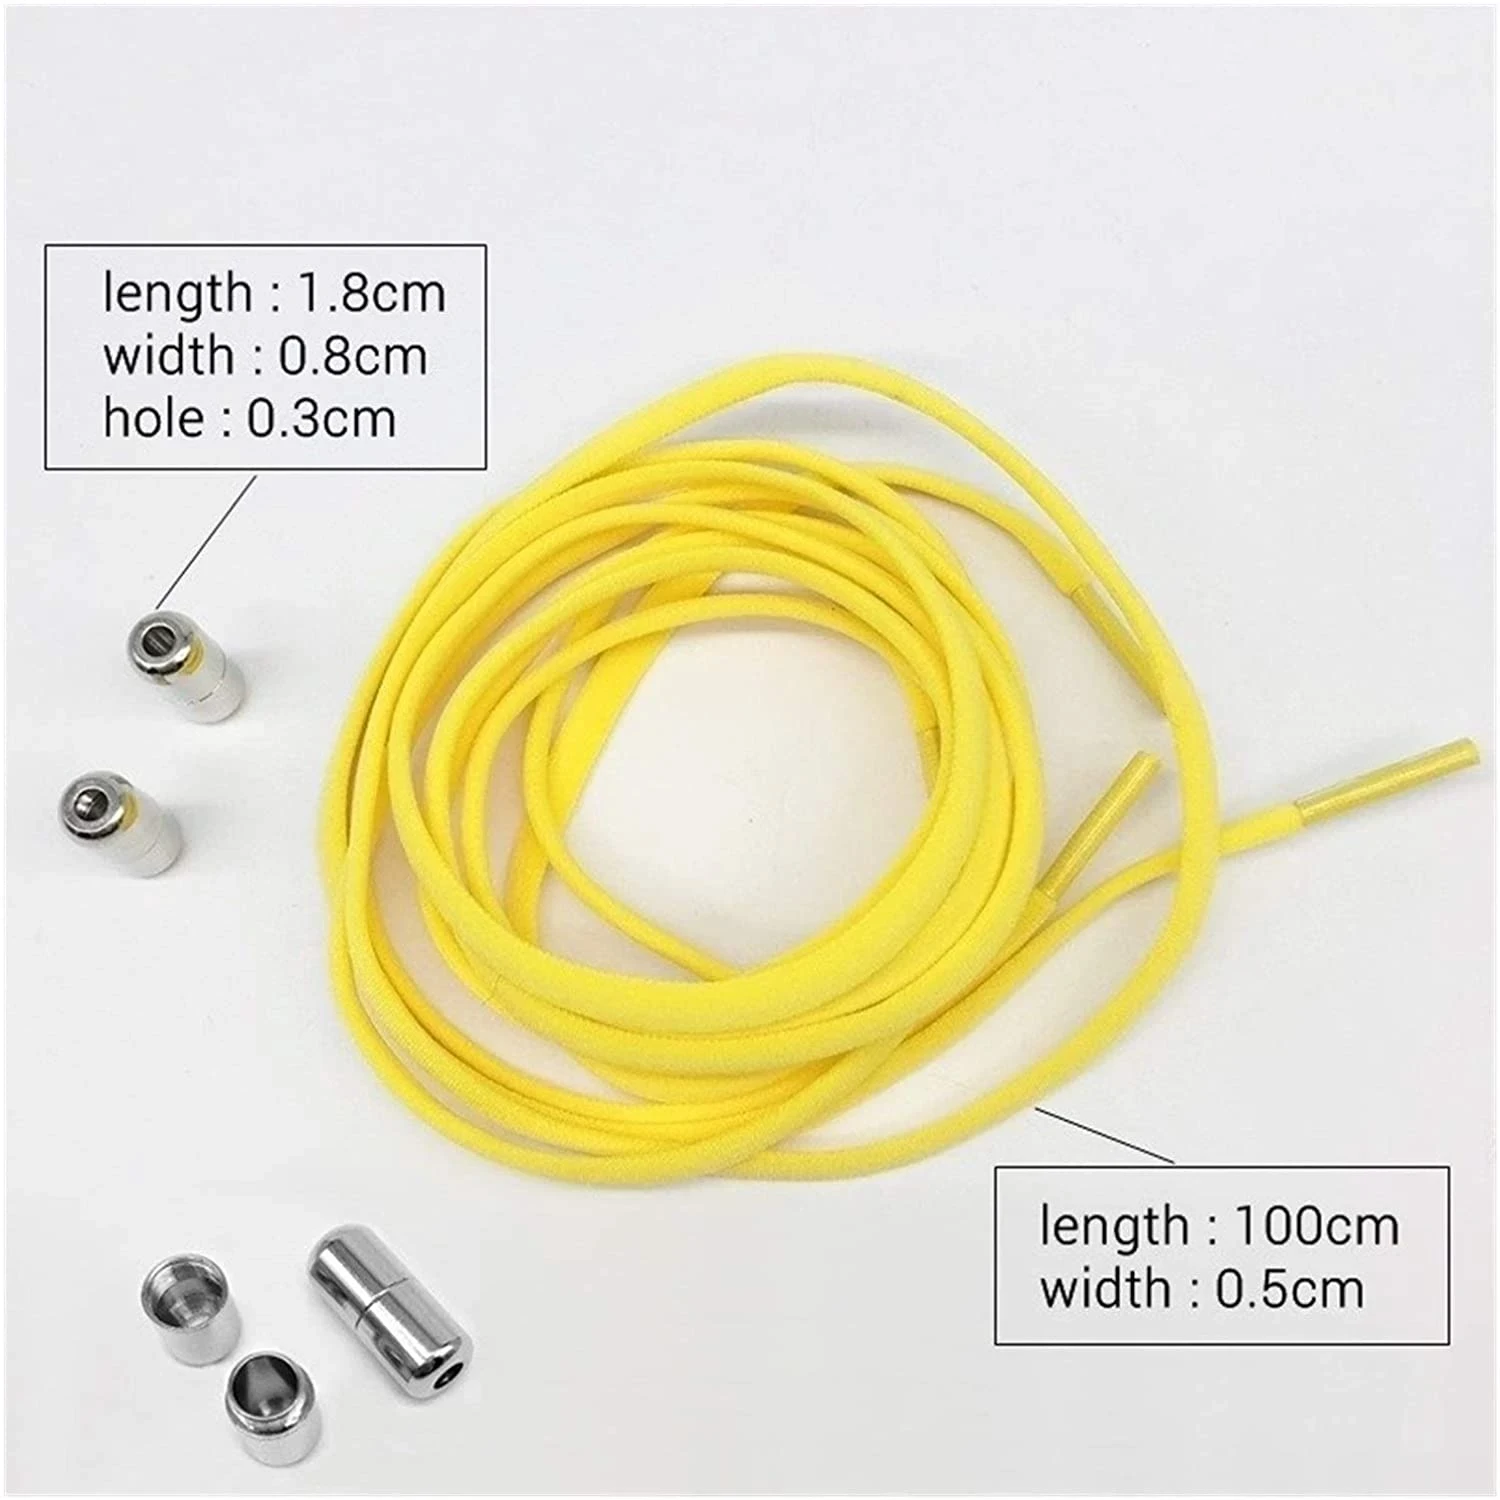 Elastic No Tie Shoelaces Semicircle Shoe Laces For and Sneakers Shoelace Quick Lazy Metal Lock Laces Shoe Strings (Color : Only lock no laces)